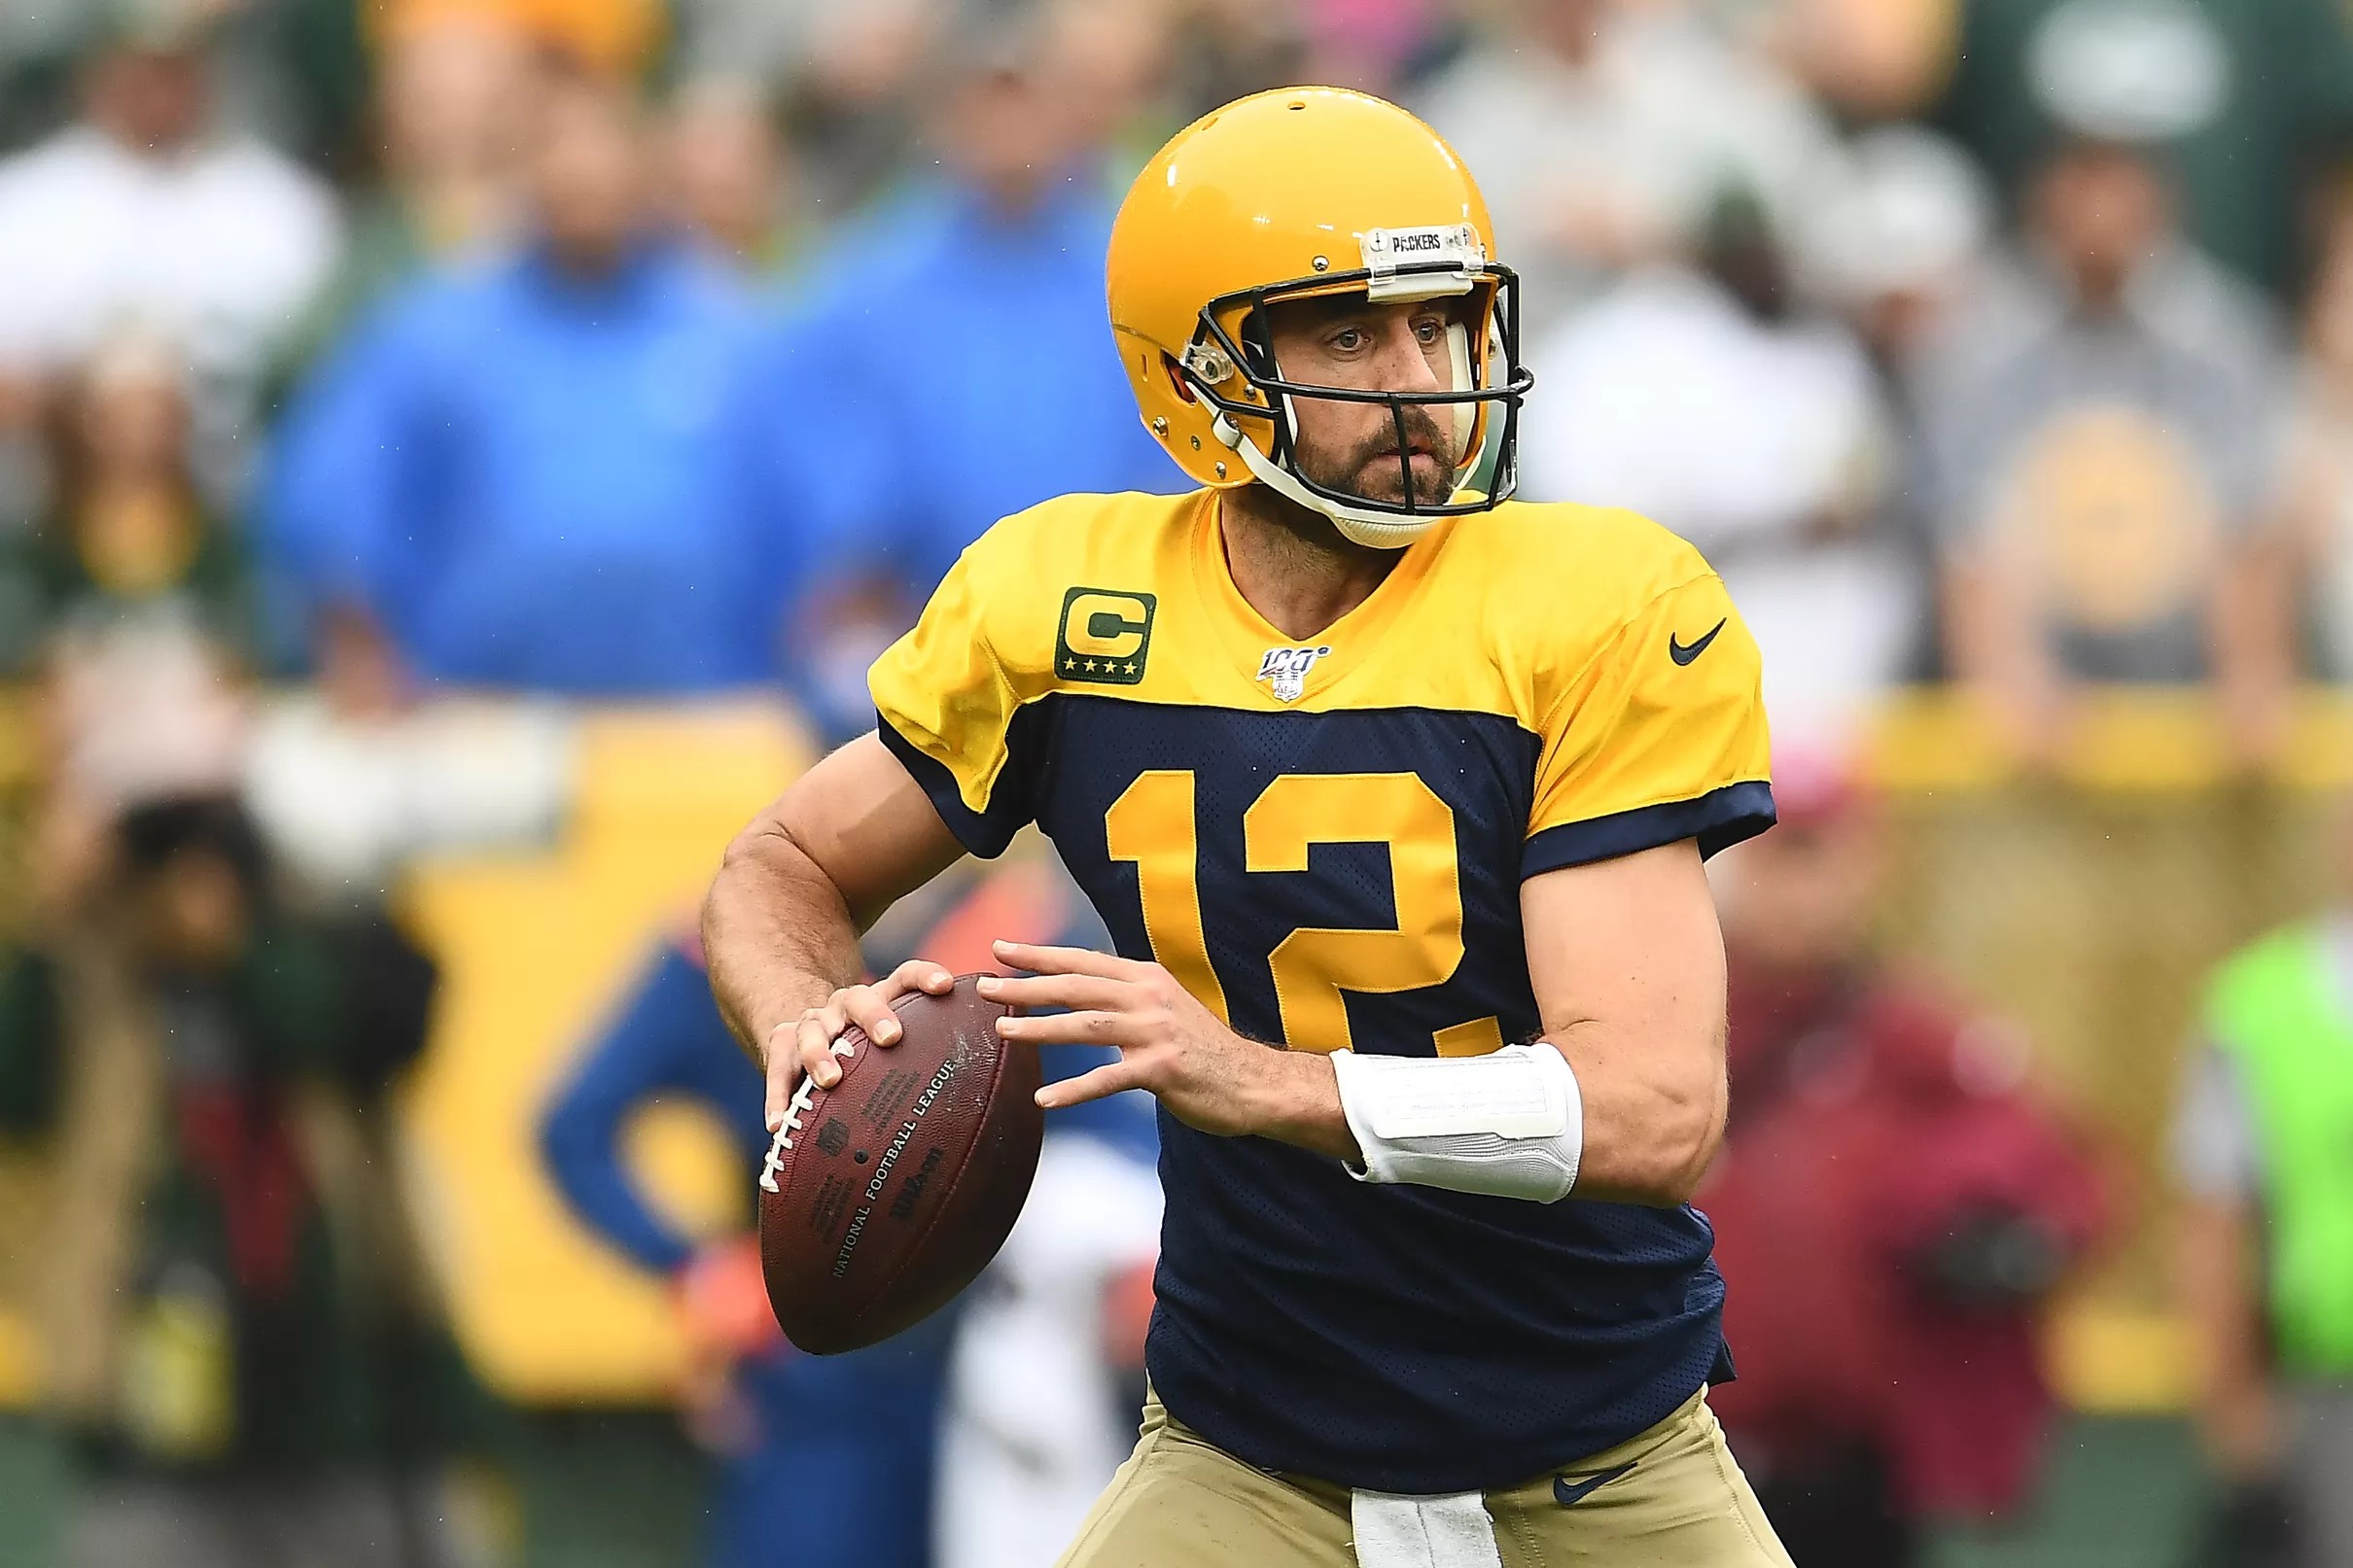 Packers will wait until 2021 for new throwback jersey, says Pro Shop